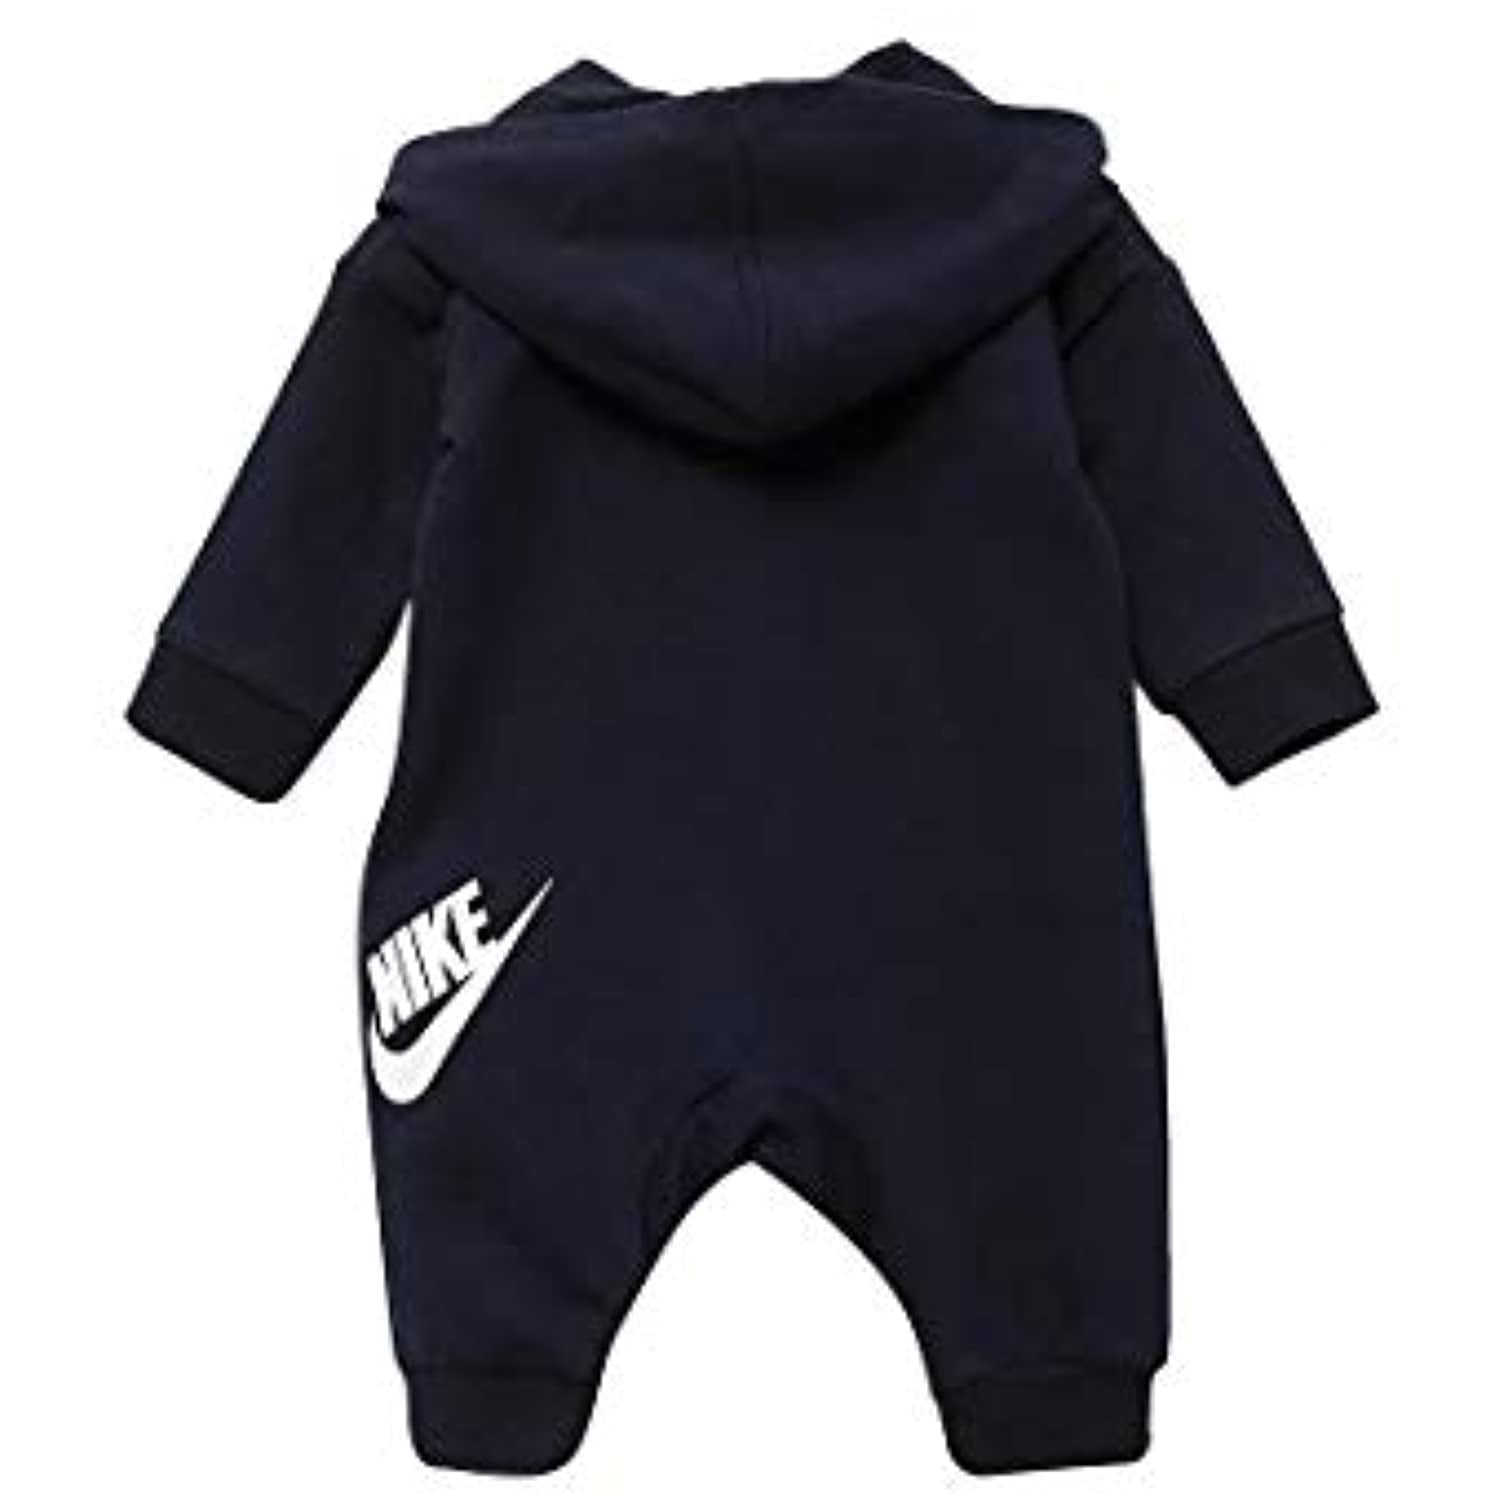 Gronden Gemarkeerd viel Nike Baby Boy All Day Play Hooded Coverall Romper (Obsidian, 18 Months) -  Walmart.com